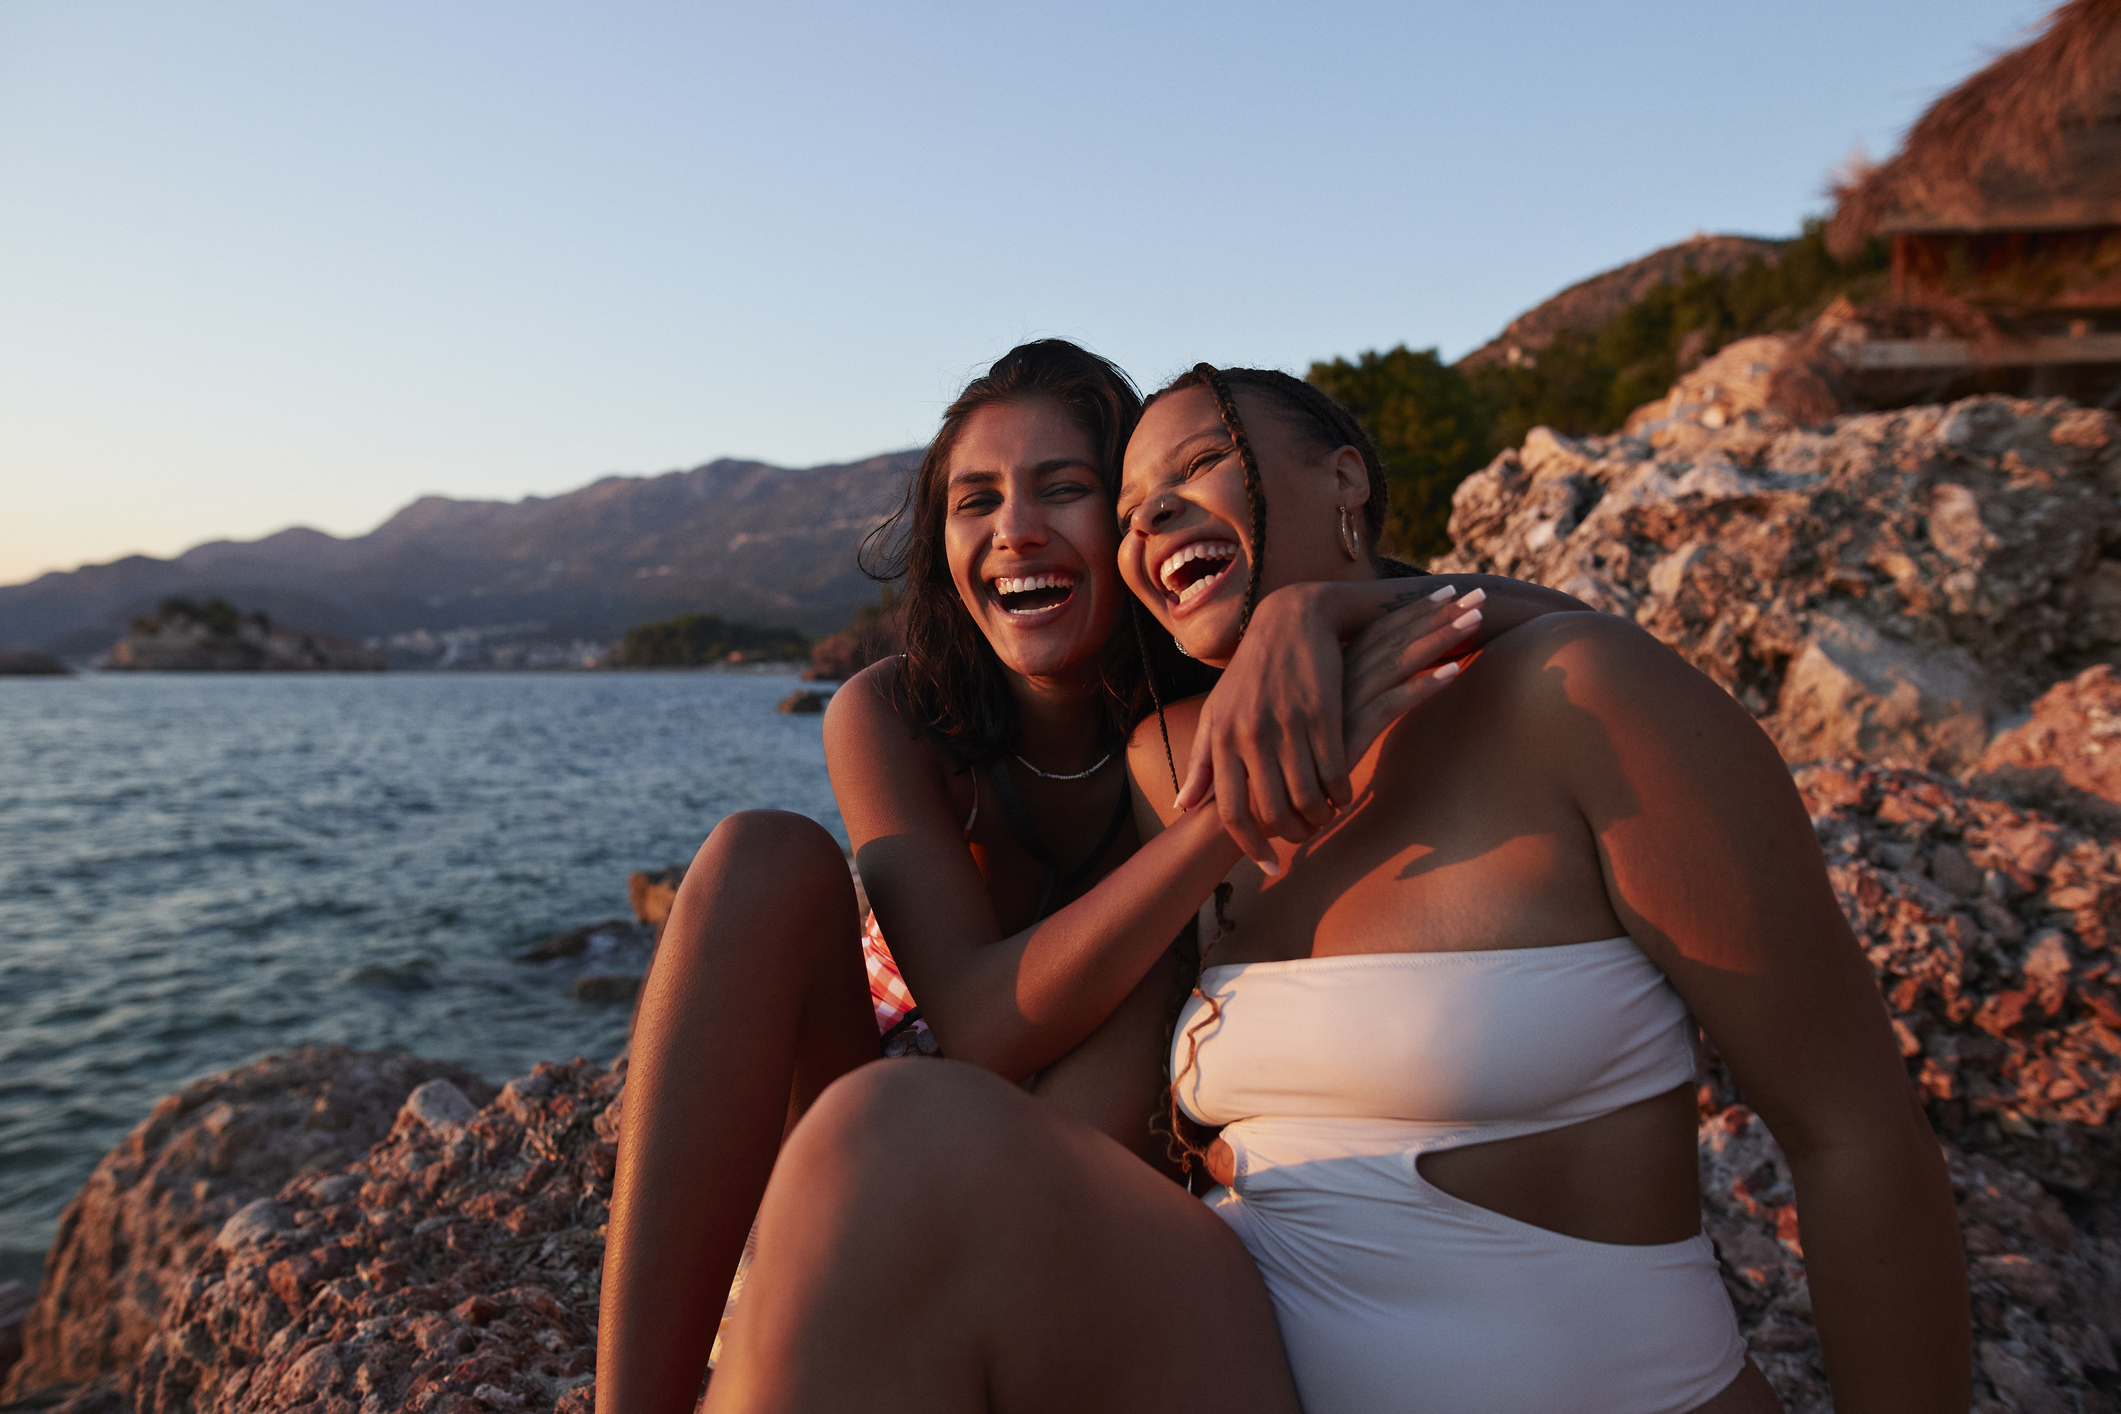 Two people laughing and sitting close together by the water at sunset